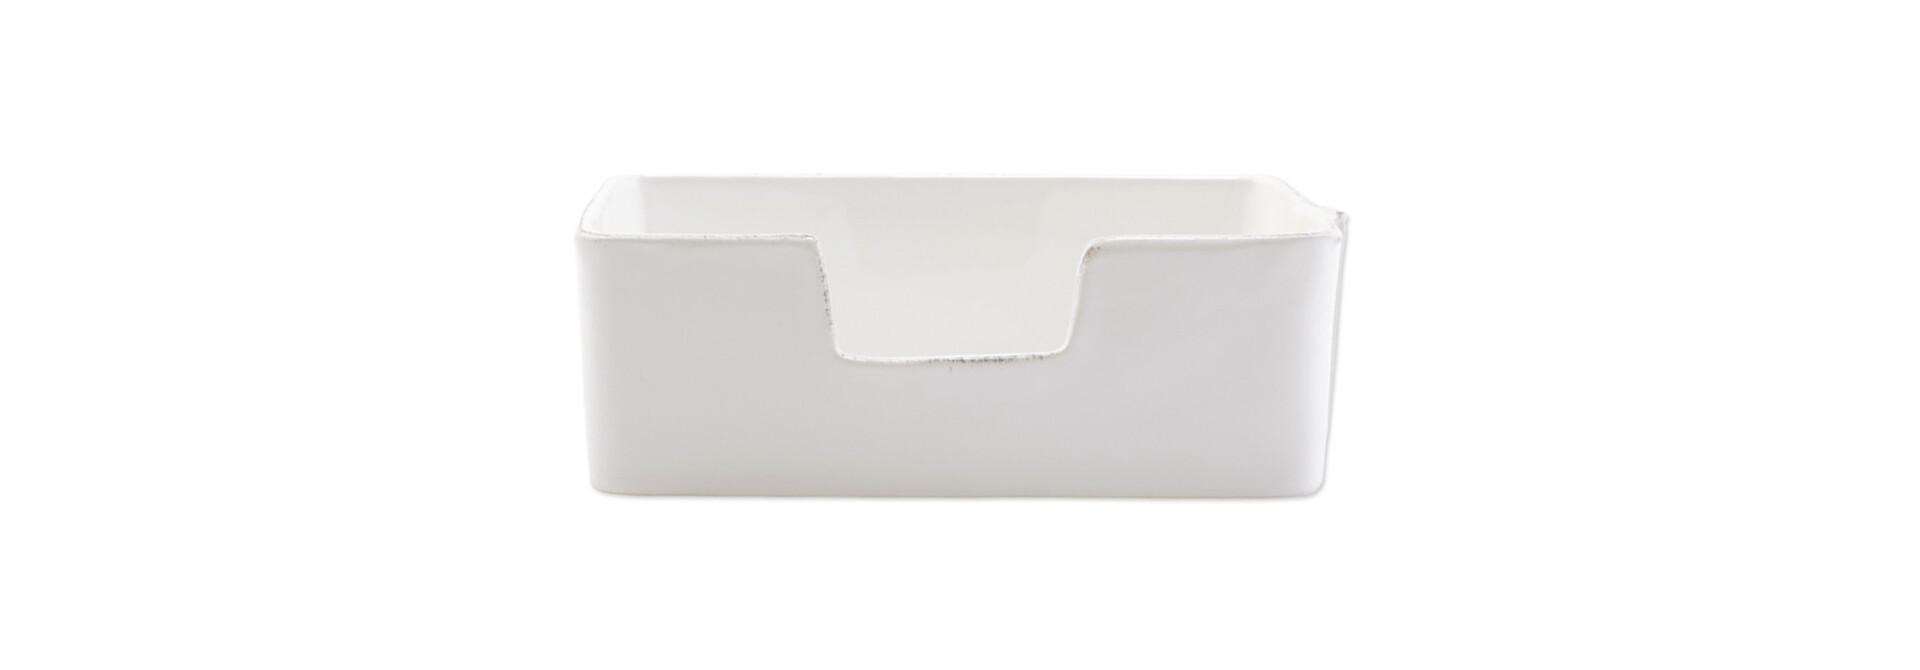 Lastra | The Guest Towel  Holder Collection, White  - 8.25 Inch x 5.25 Inch x 3.25Inch